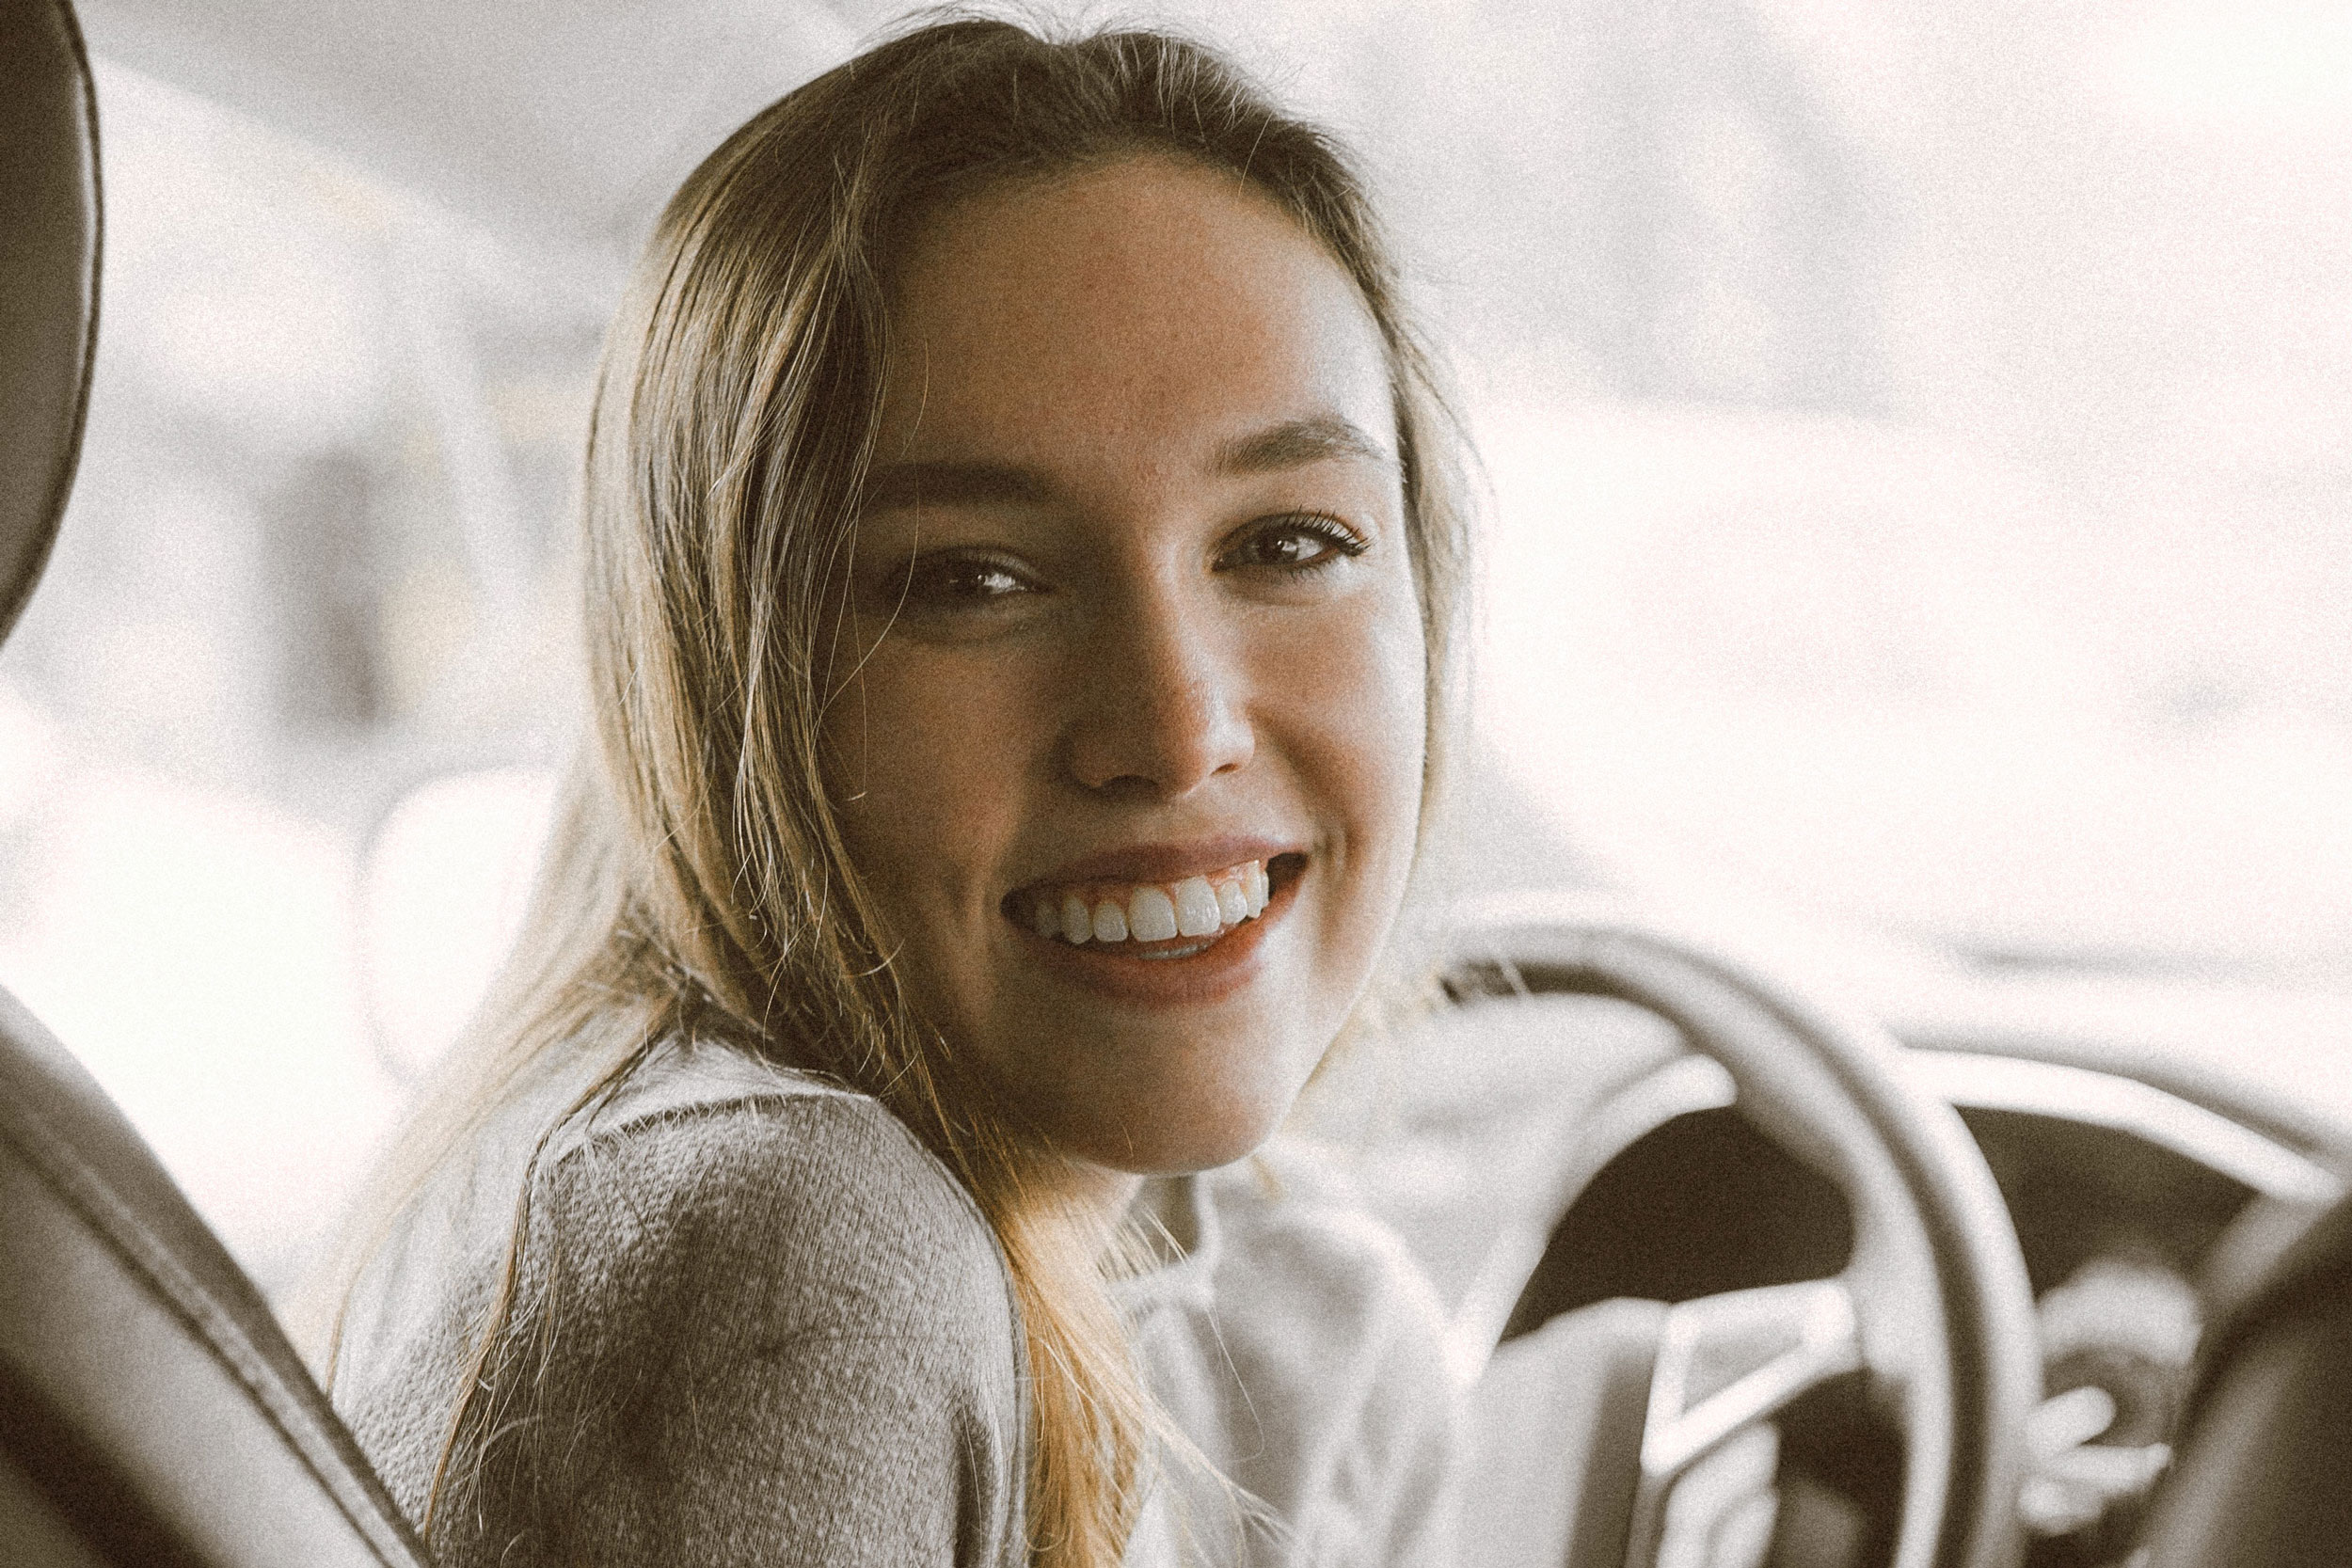 woman inside vehicle smiling